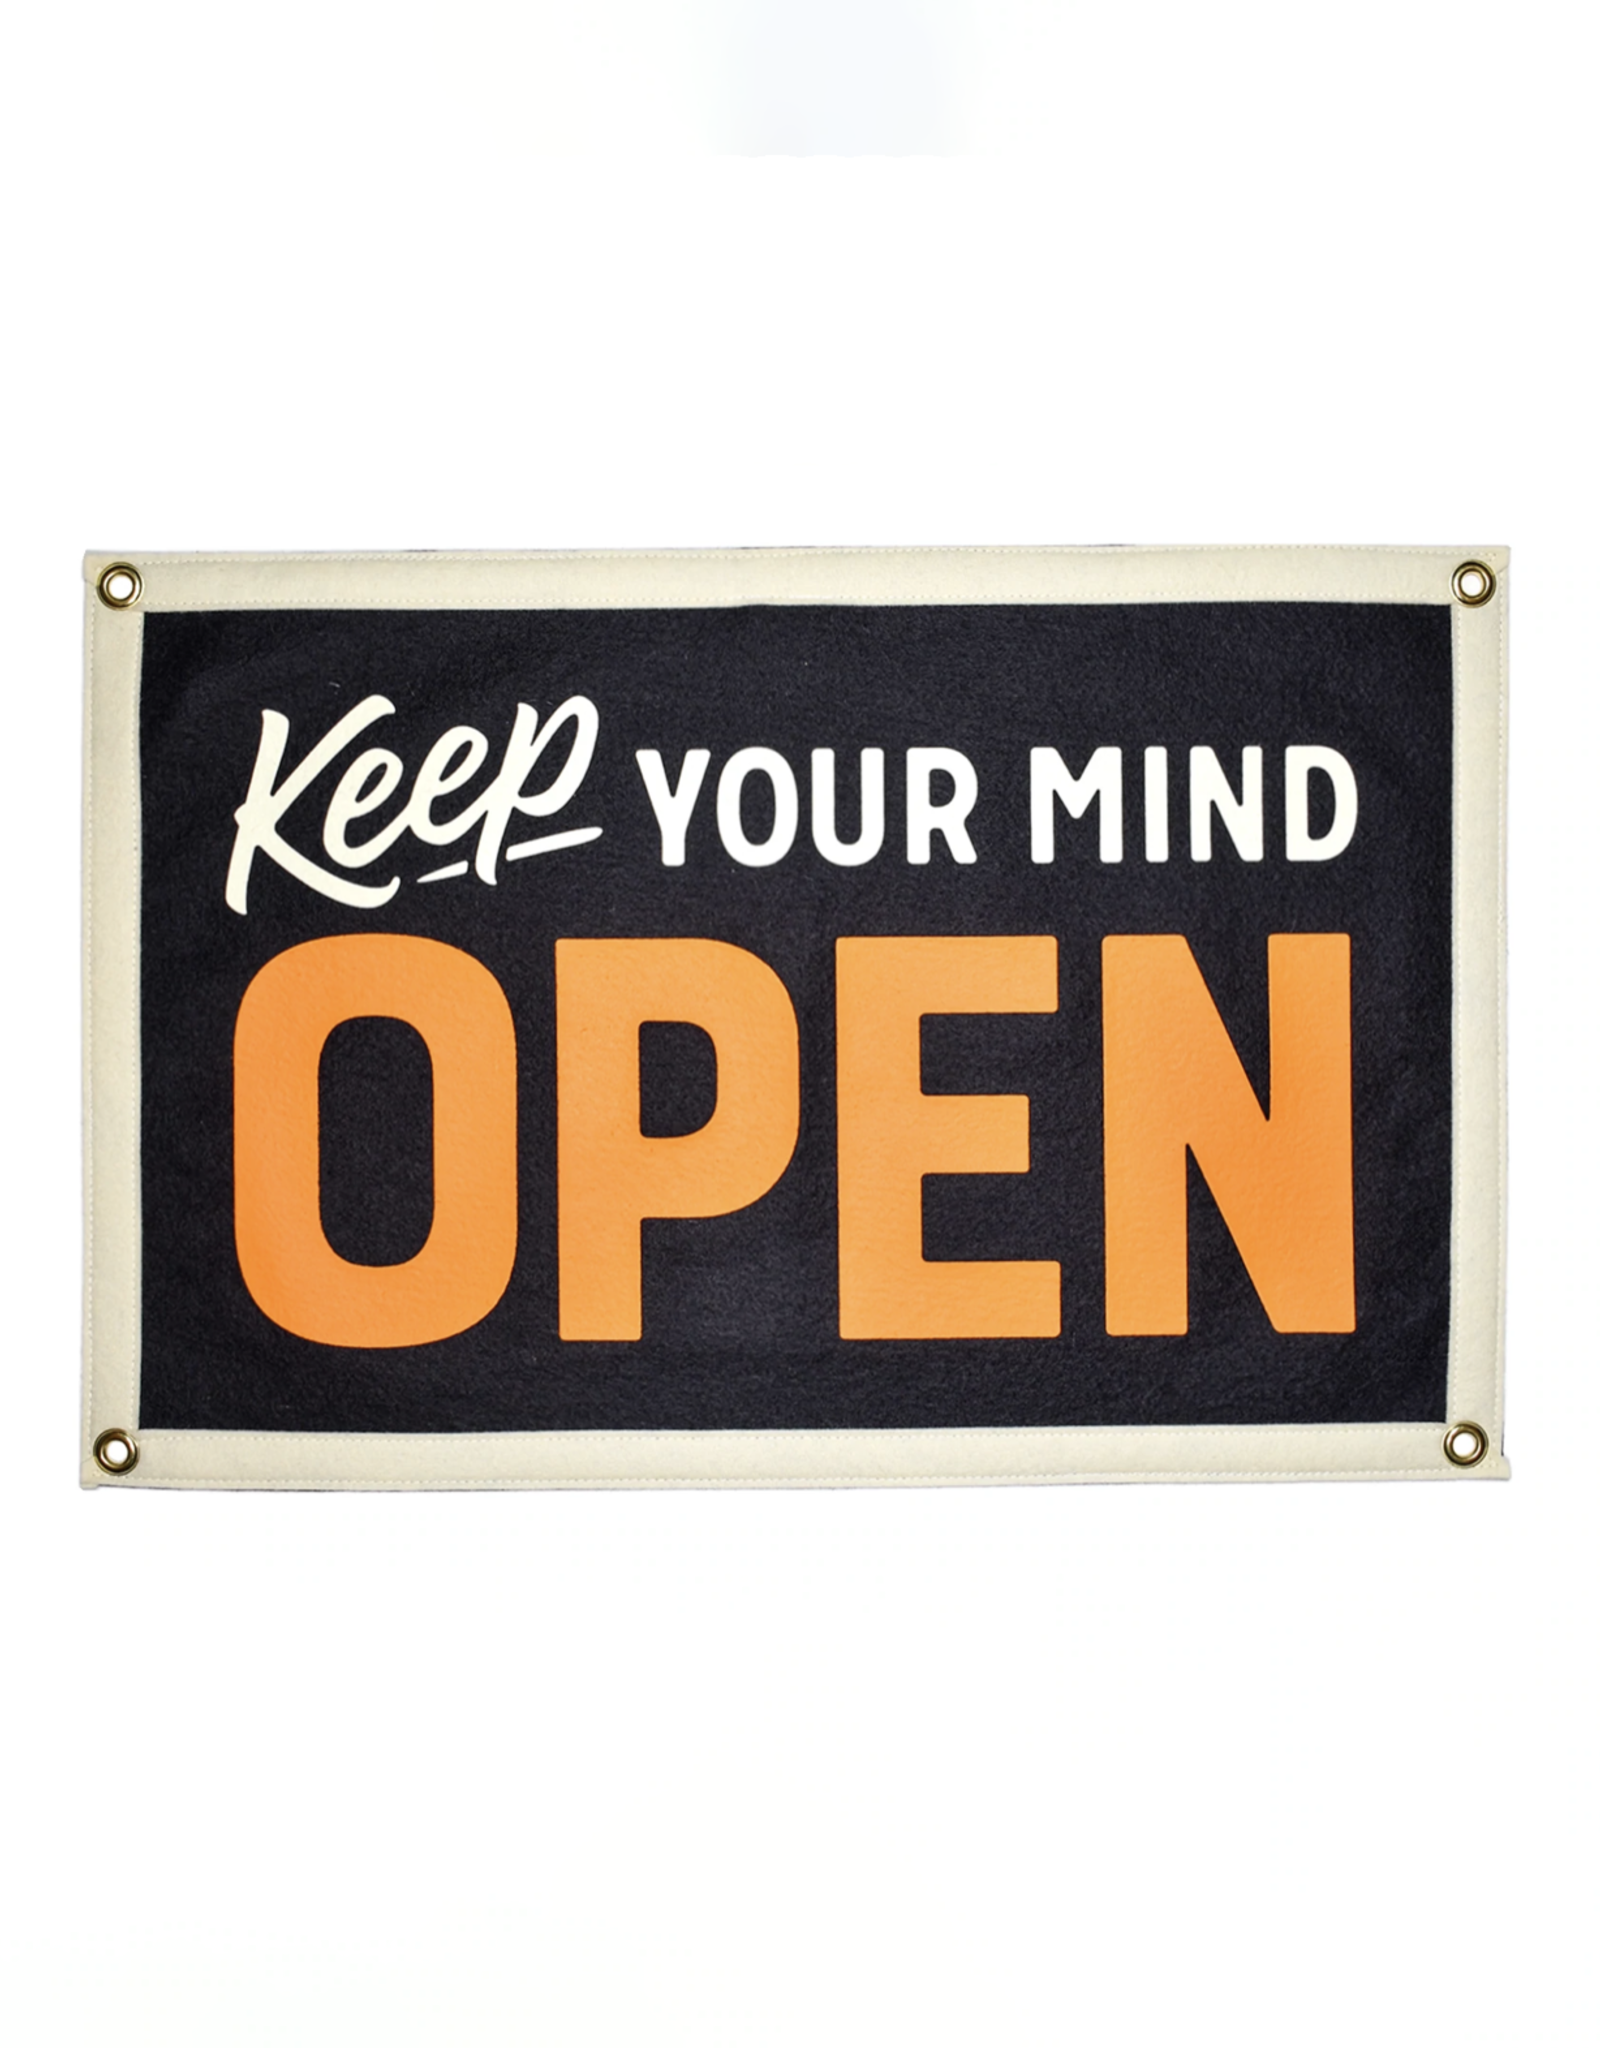 Oxford Pennant Keep Your Mind OPEN